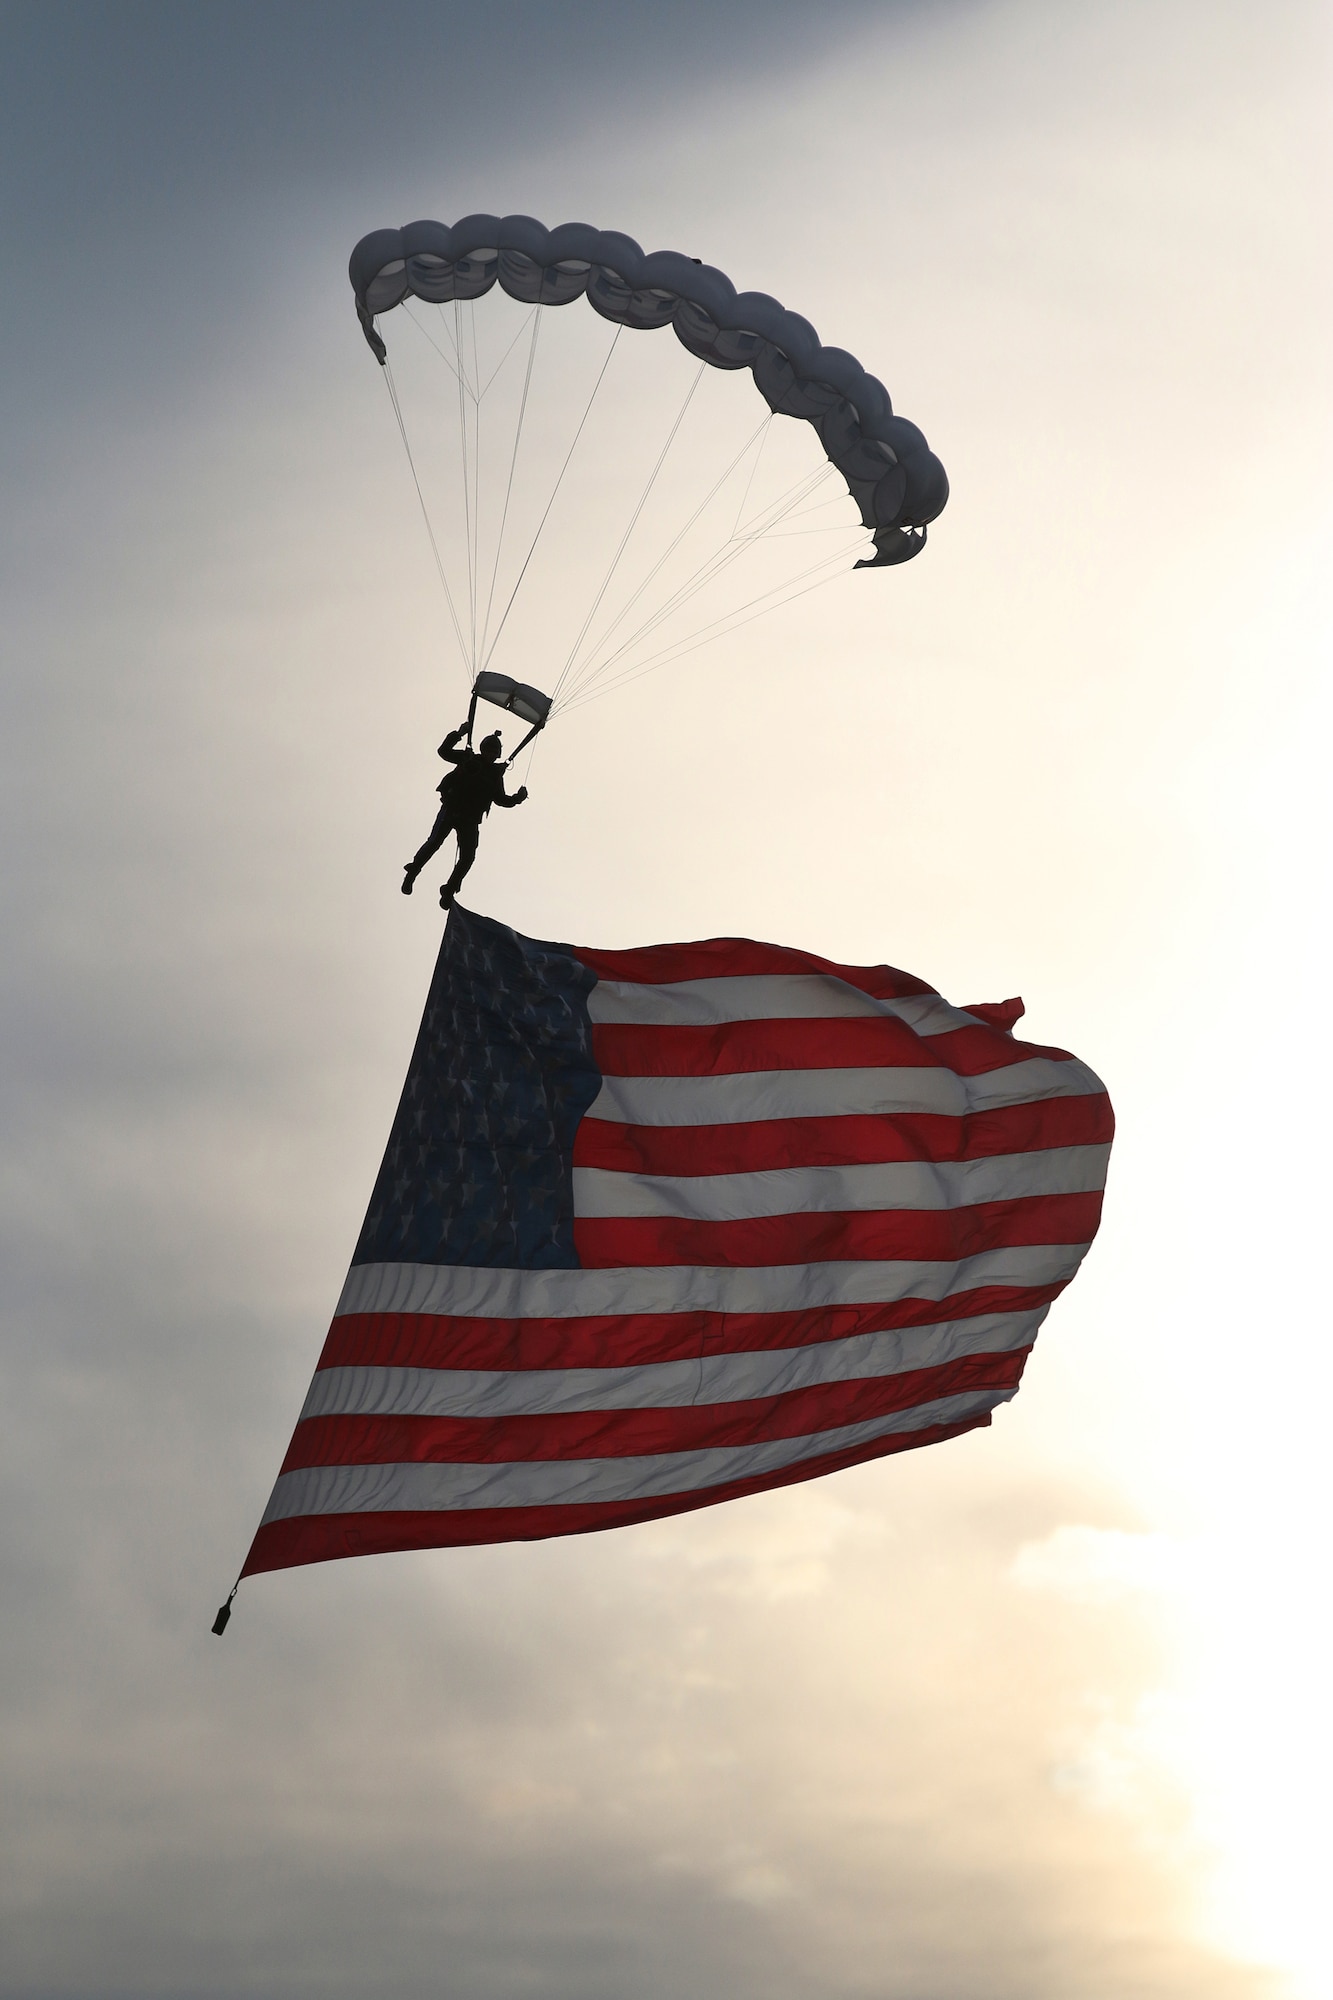 WRIGHT-PATTERSON AIR FORCE BASE, Ohio – One of several parachutists glides over the starting line kicking off the 19th Annual Air Force Marathon held Sept. 19, 2015. The Air Force Marathon is an annual endurance event held the third Saturday of September at Wright-Patterson Air Force Base in Dayton, Ohio. (U.S. Air Force photo /Tech. Sgt. Patrick O’Reilly)